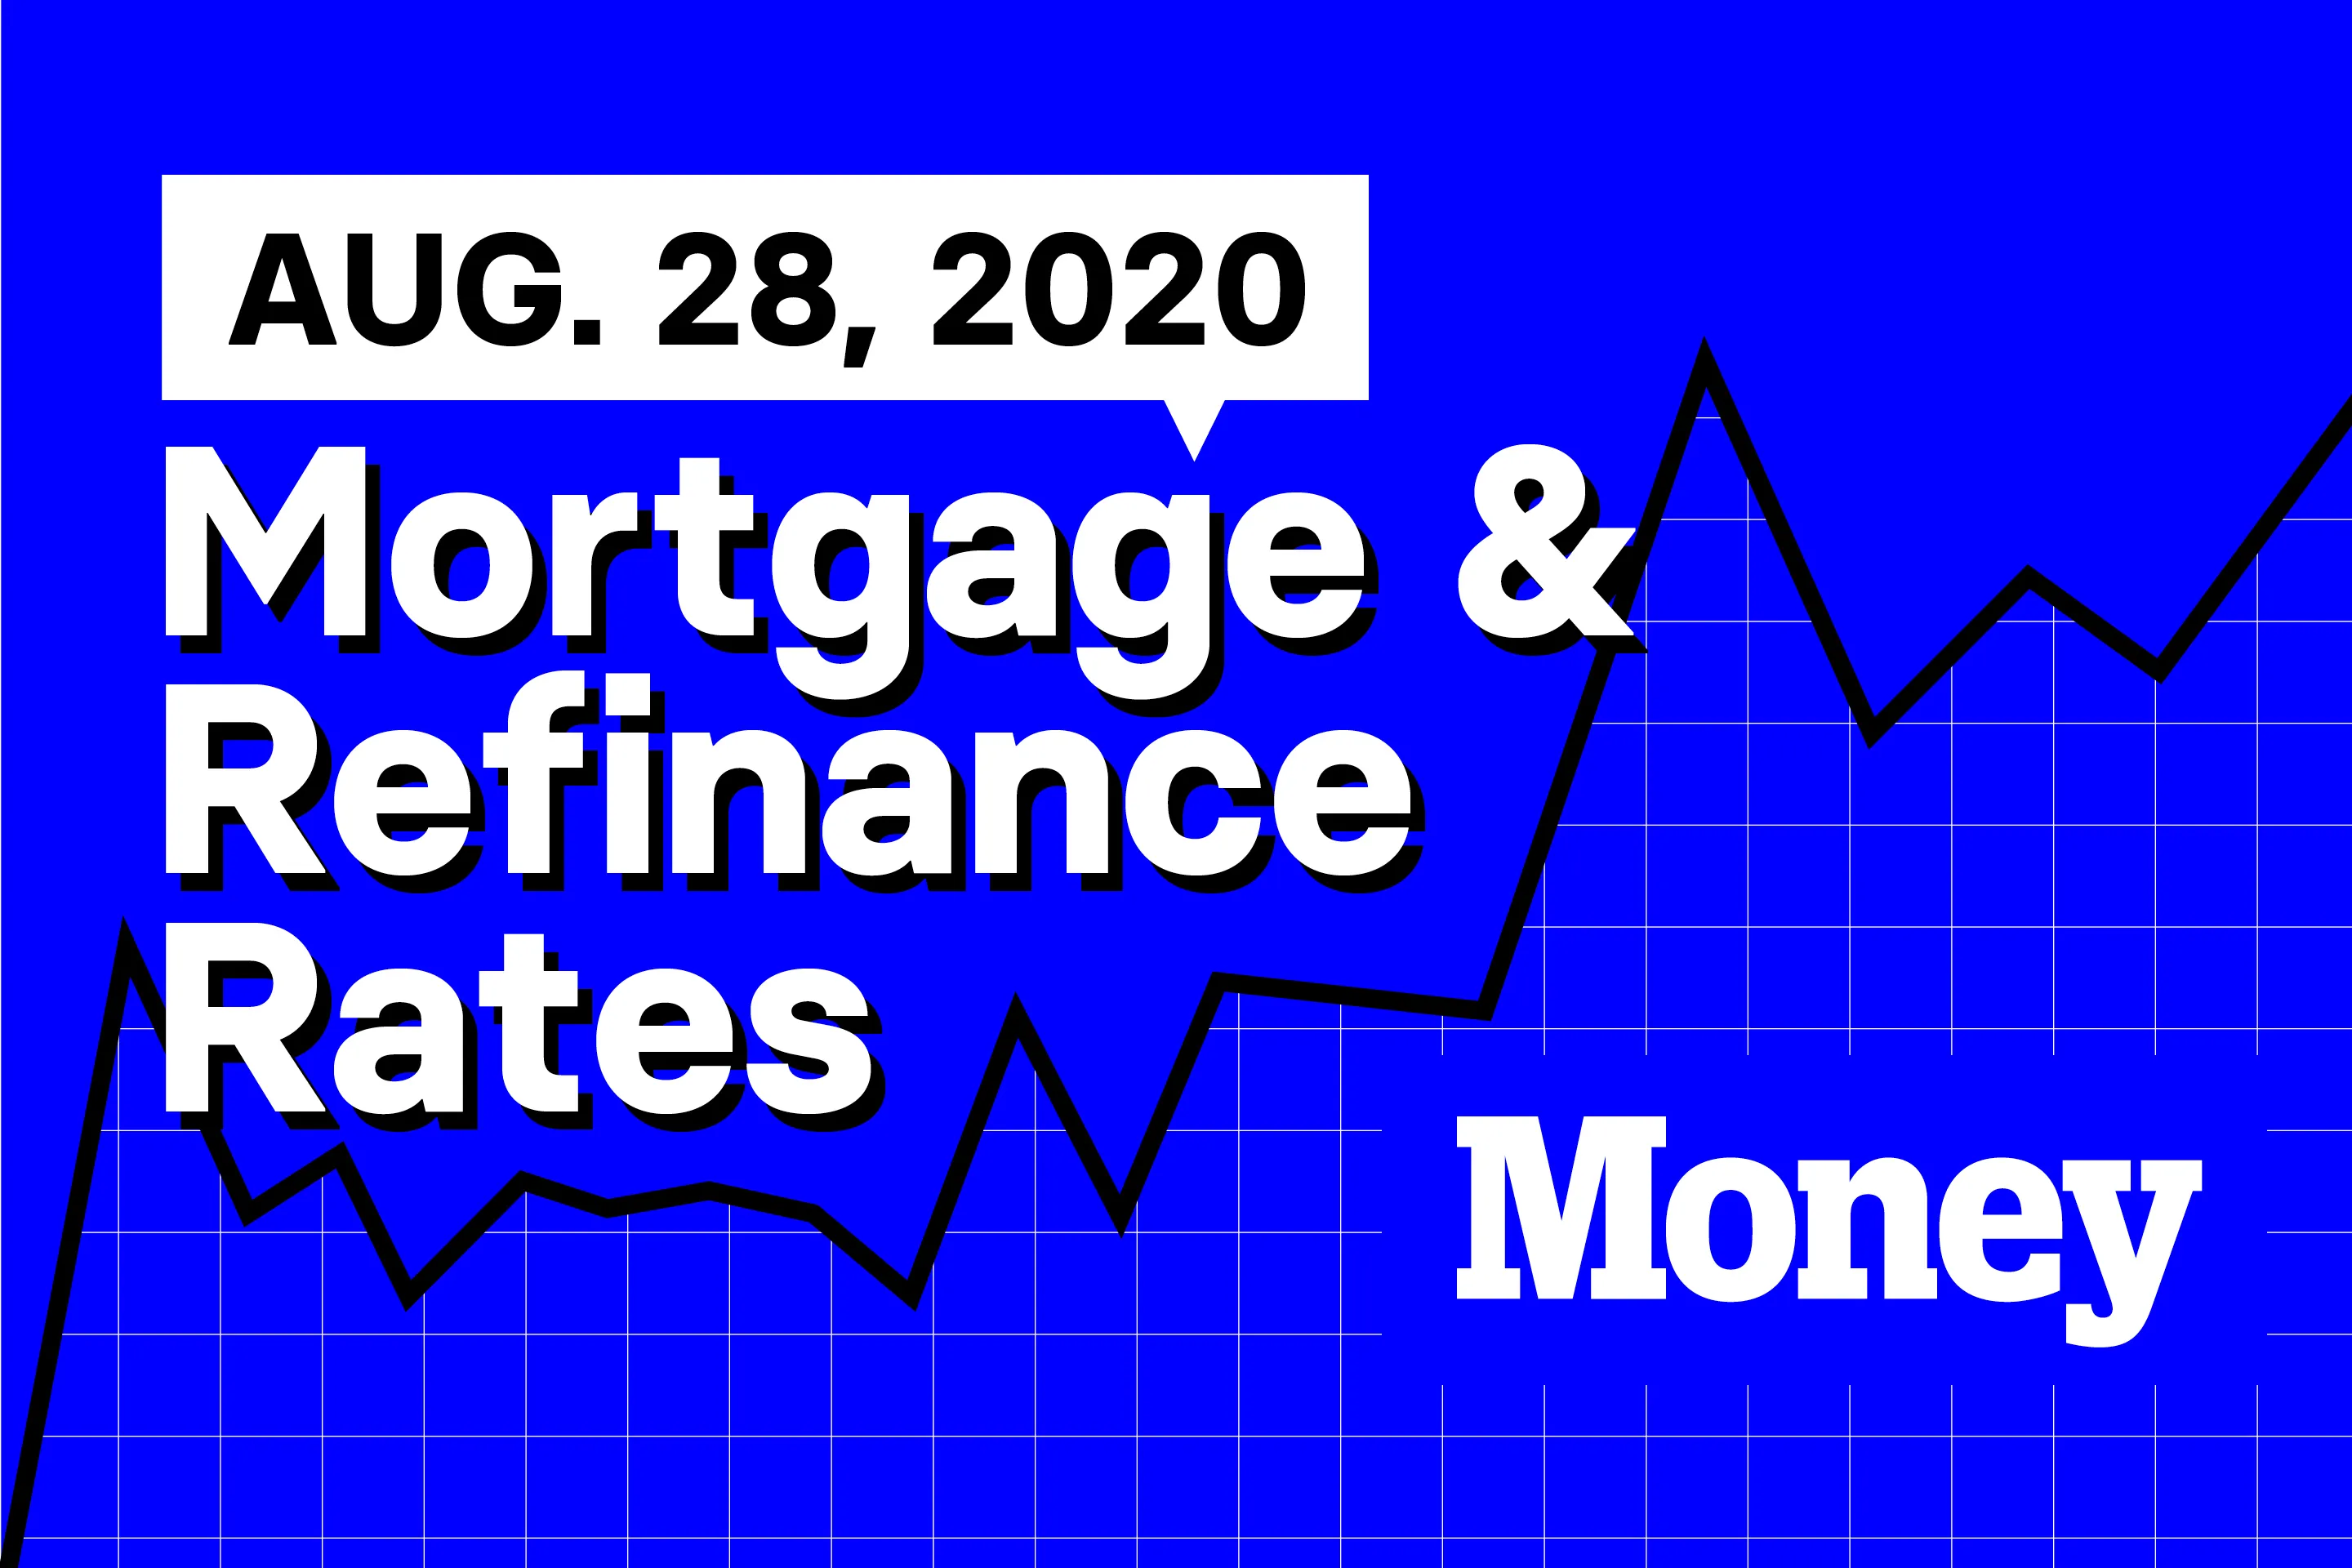 Here Are Today's Best Mortgage & Refinance Rates for August 28, 2020